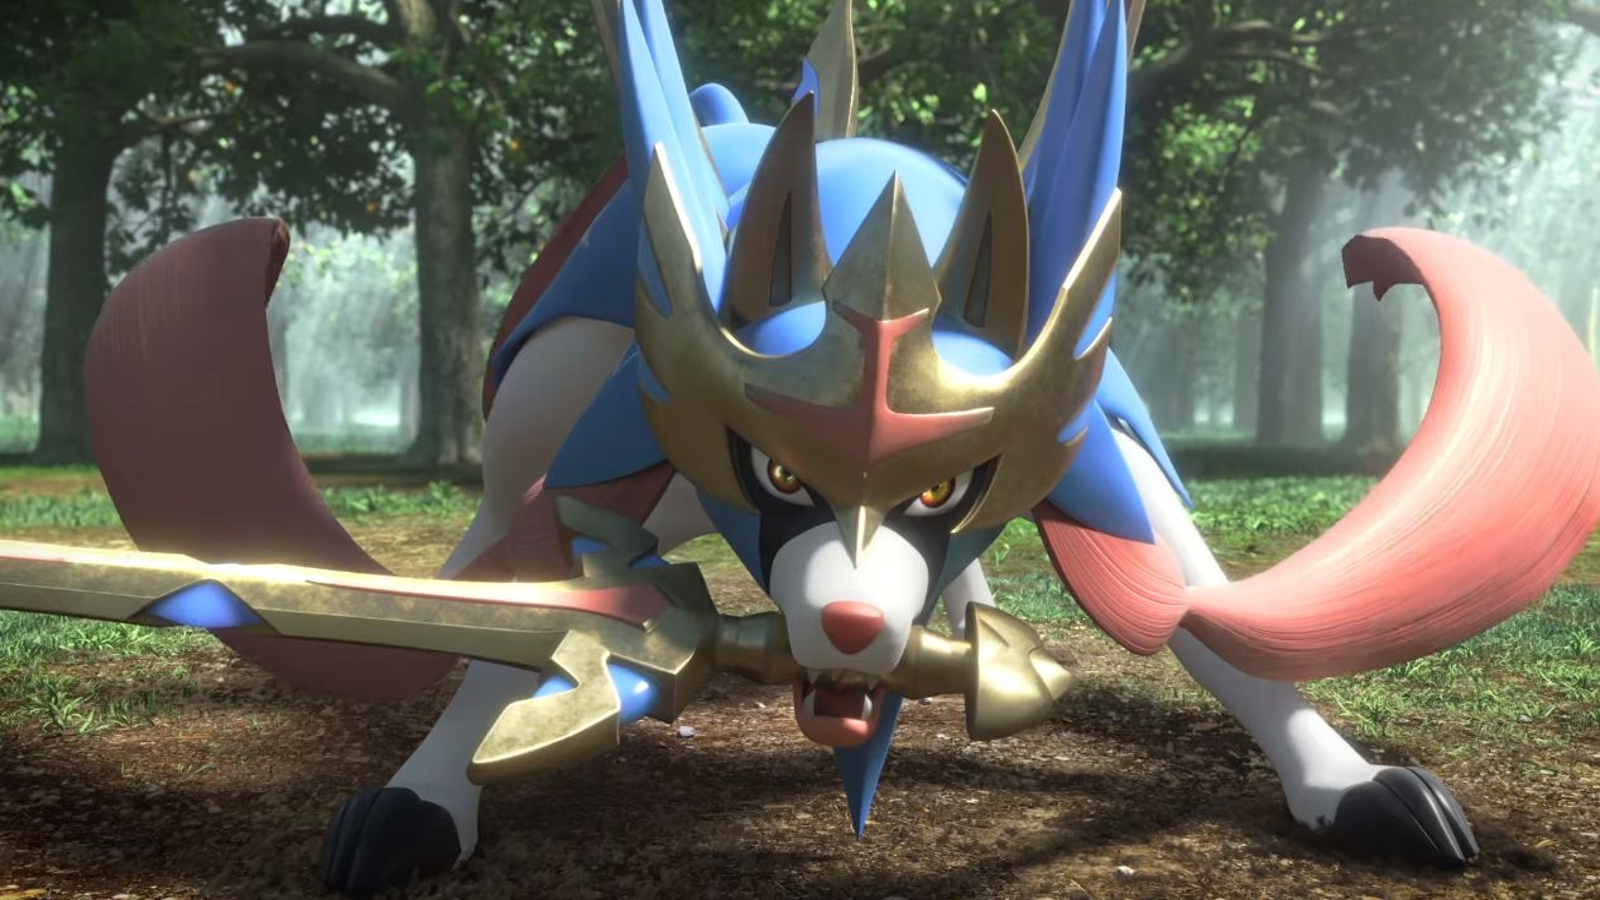 Has a trademark confirmed a leak that armored evolutions will be in Pokemon  Sword & Shield? - Dexerto